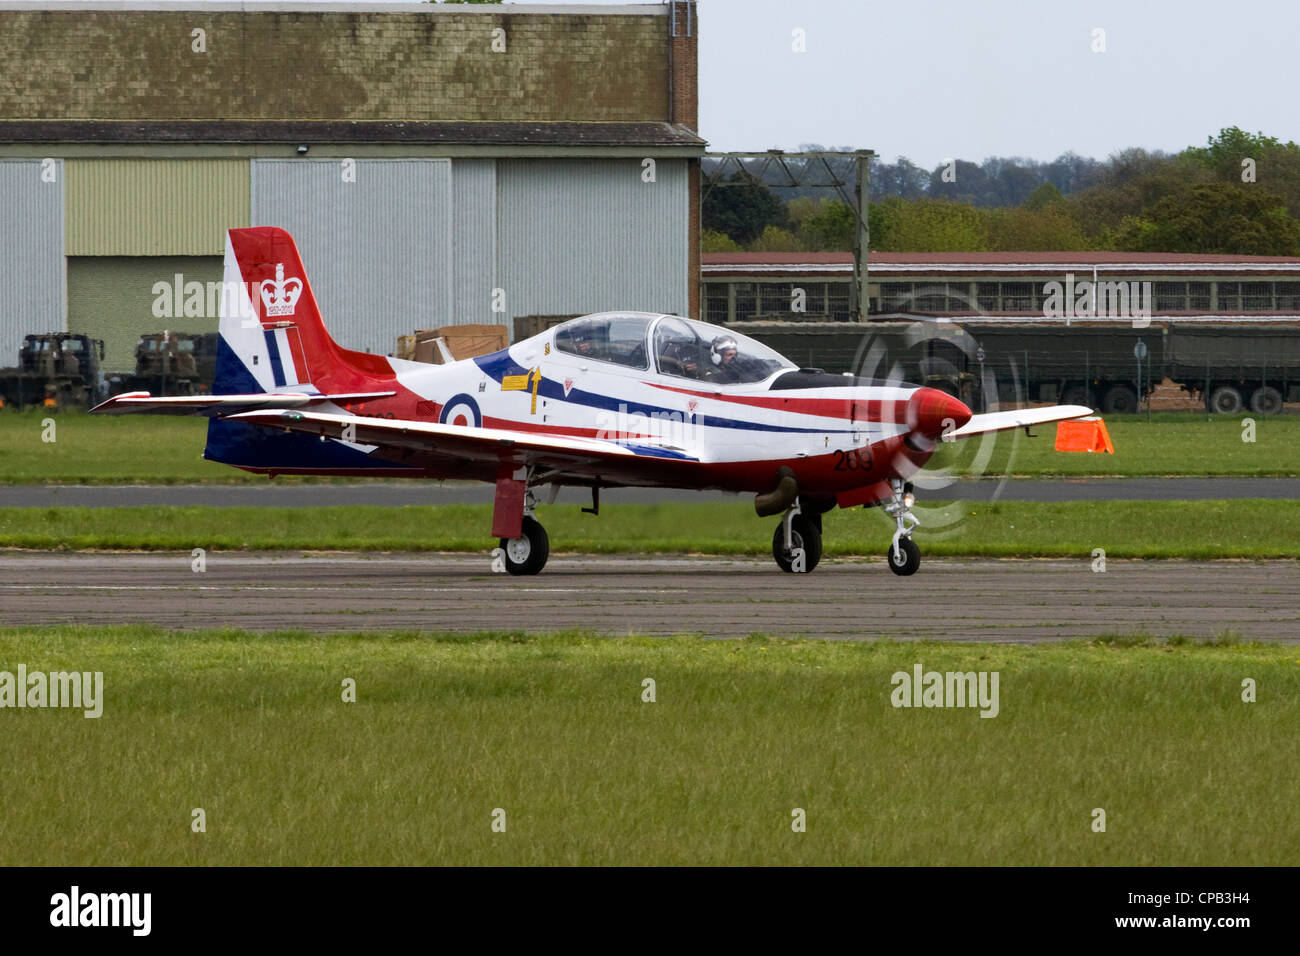 RAF Short Tucano T1 two-seat turboprop basic trainer at an Air show in Abingdon Stock Photo